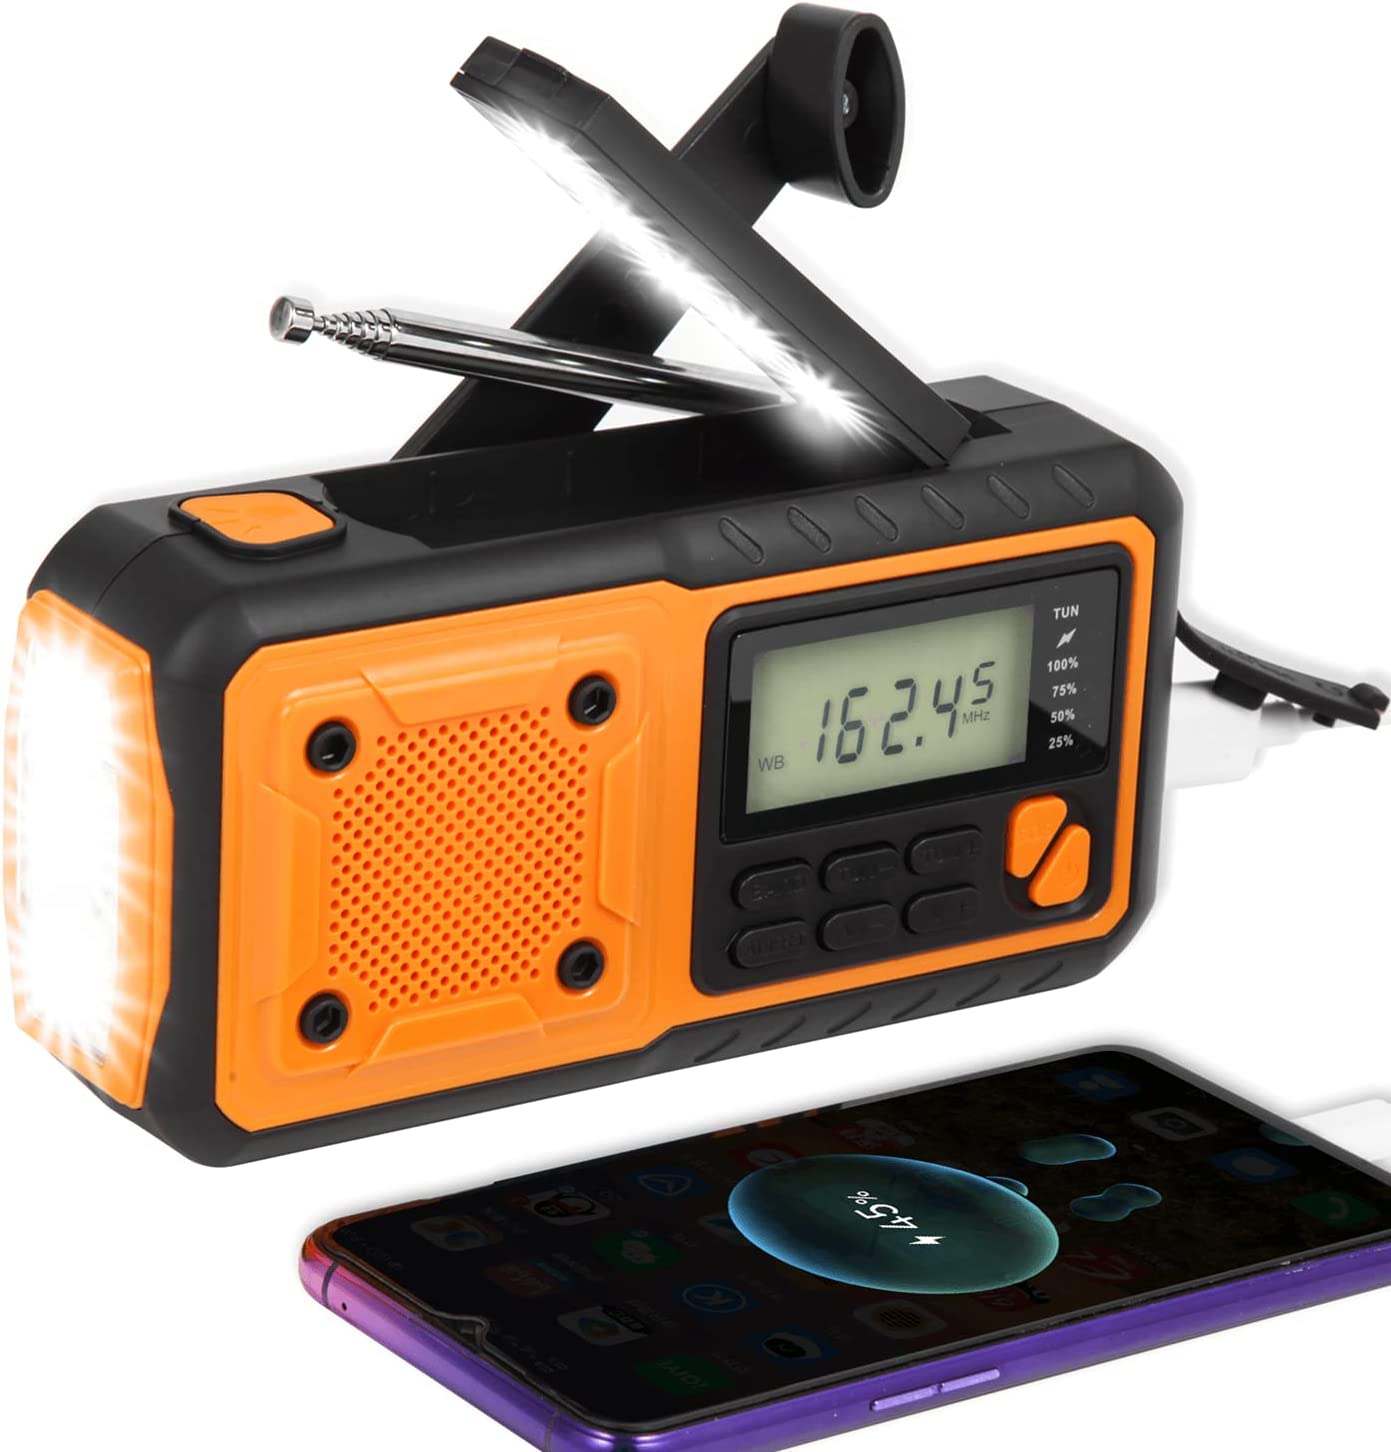 Emergency Solar Hand Crank AM/FM/WB/NOAA Weather Alert Portable Radio with Power Bank,LCD Display,Cellphone Charger, Headphone, Flashlight, Reading Lamp and SOS Alarm for Outdoor Camping (Orange)